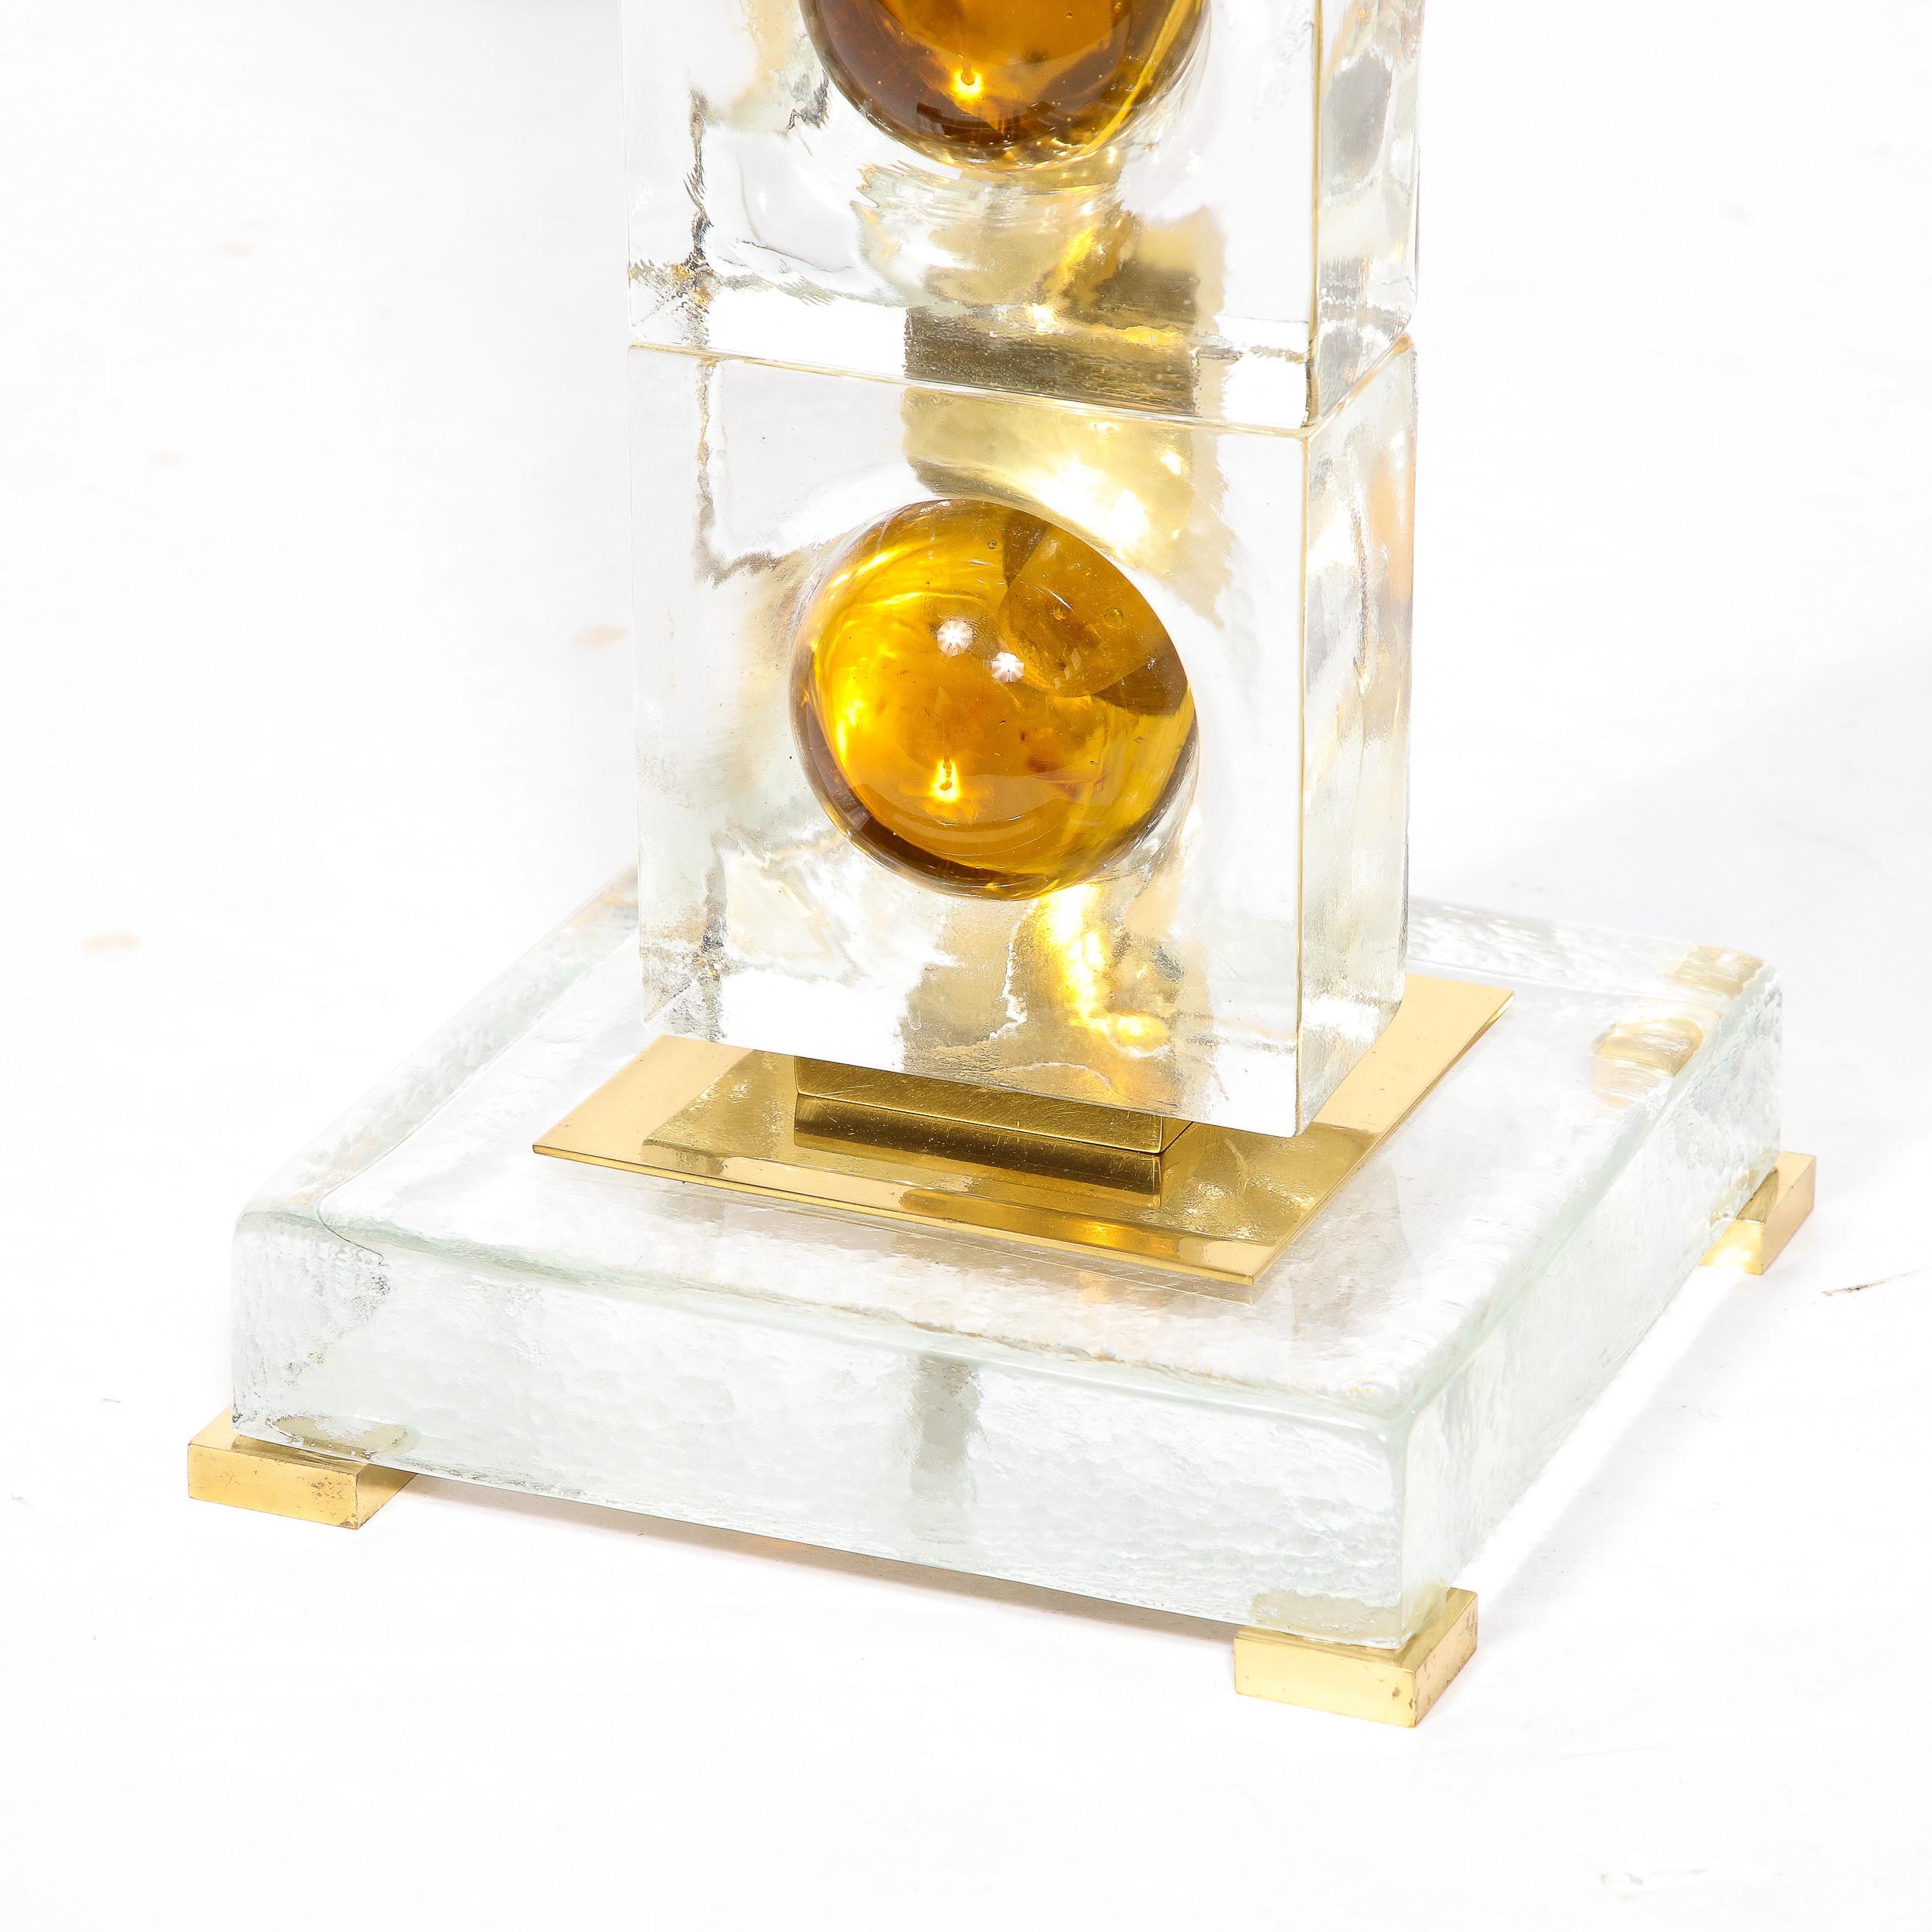 Pair of Modernist Stacked Sphere Table Lamps in Amber & Translucent Murano Glass 3